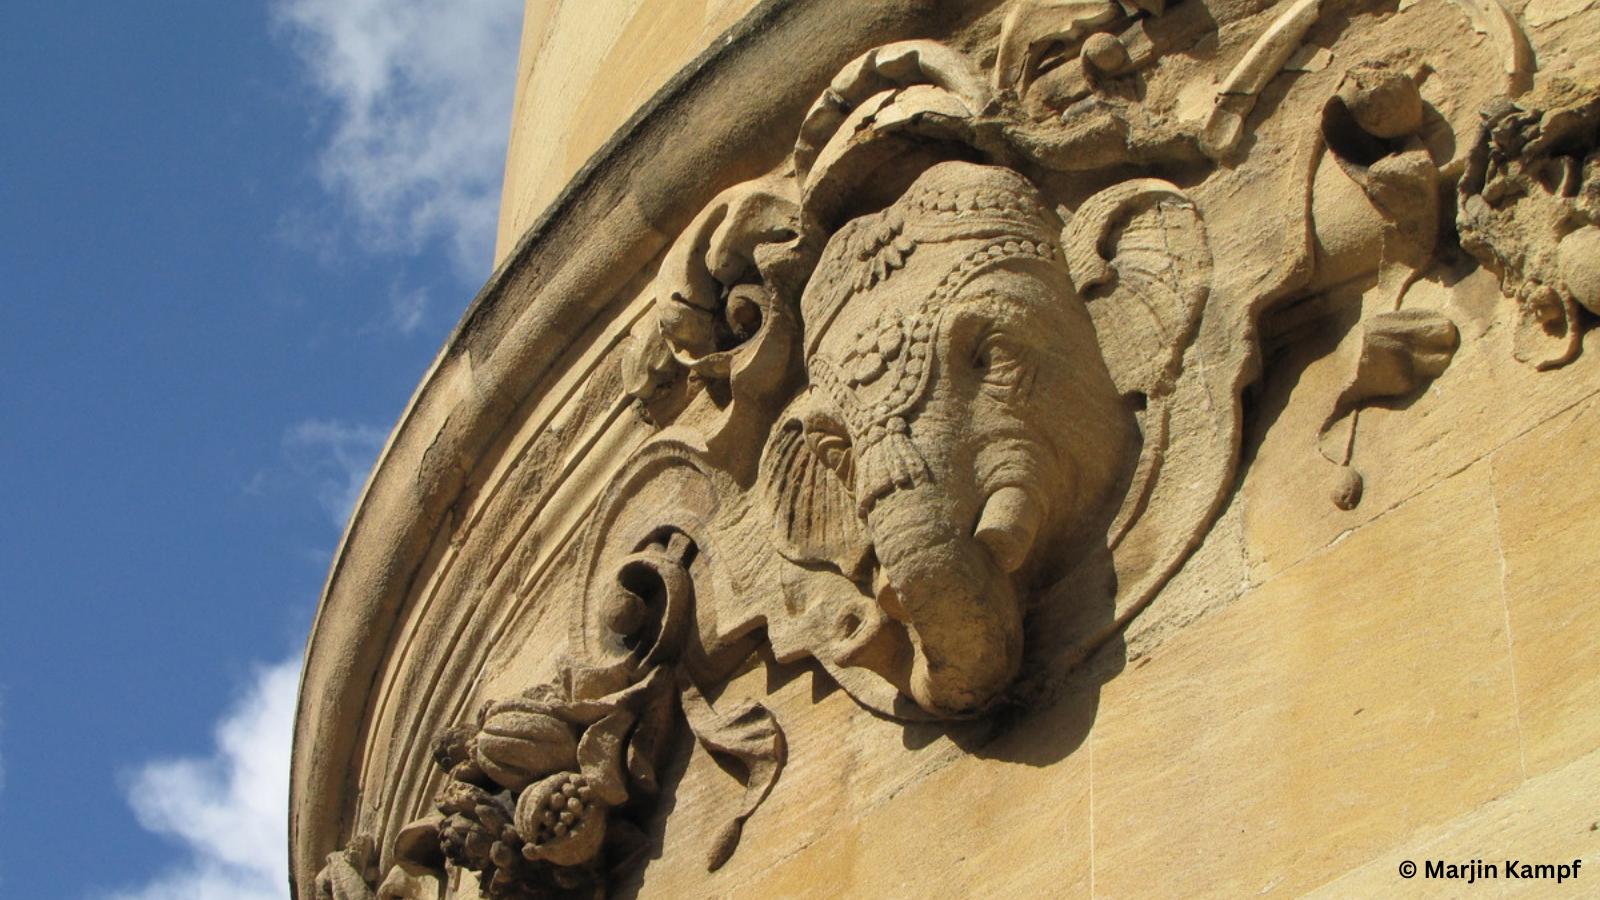 Stone carving of an elephant